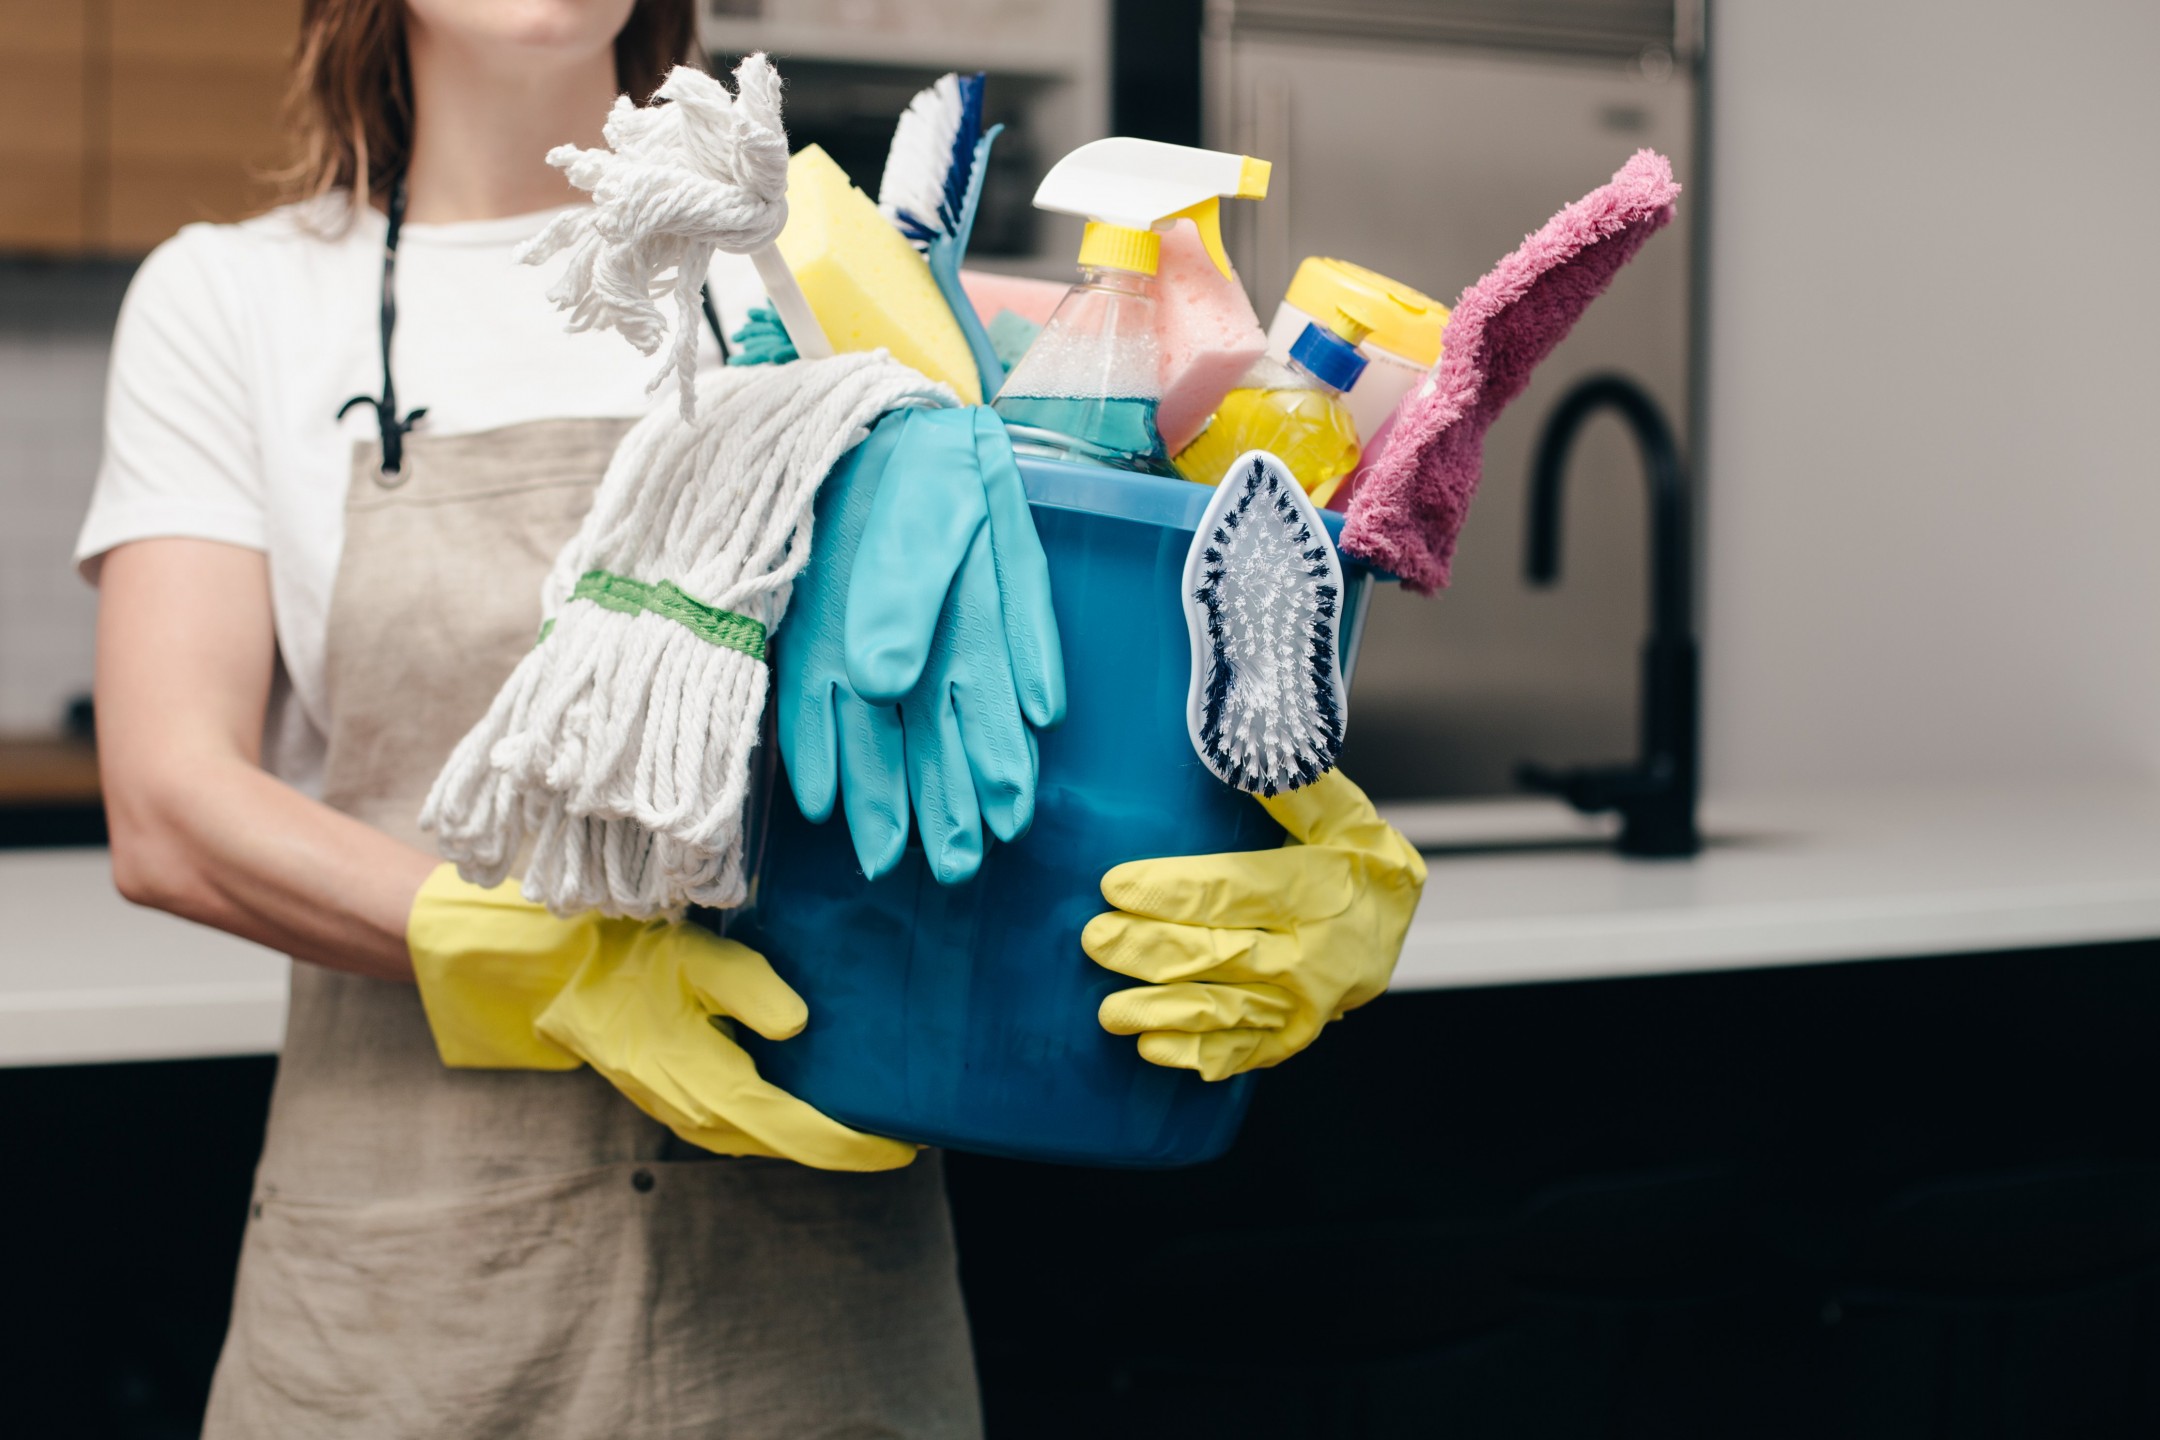 squarerooms-woman-holding-bucket-of-cleaning-supplies